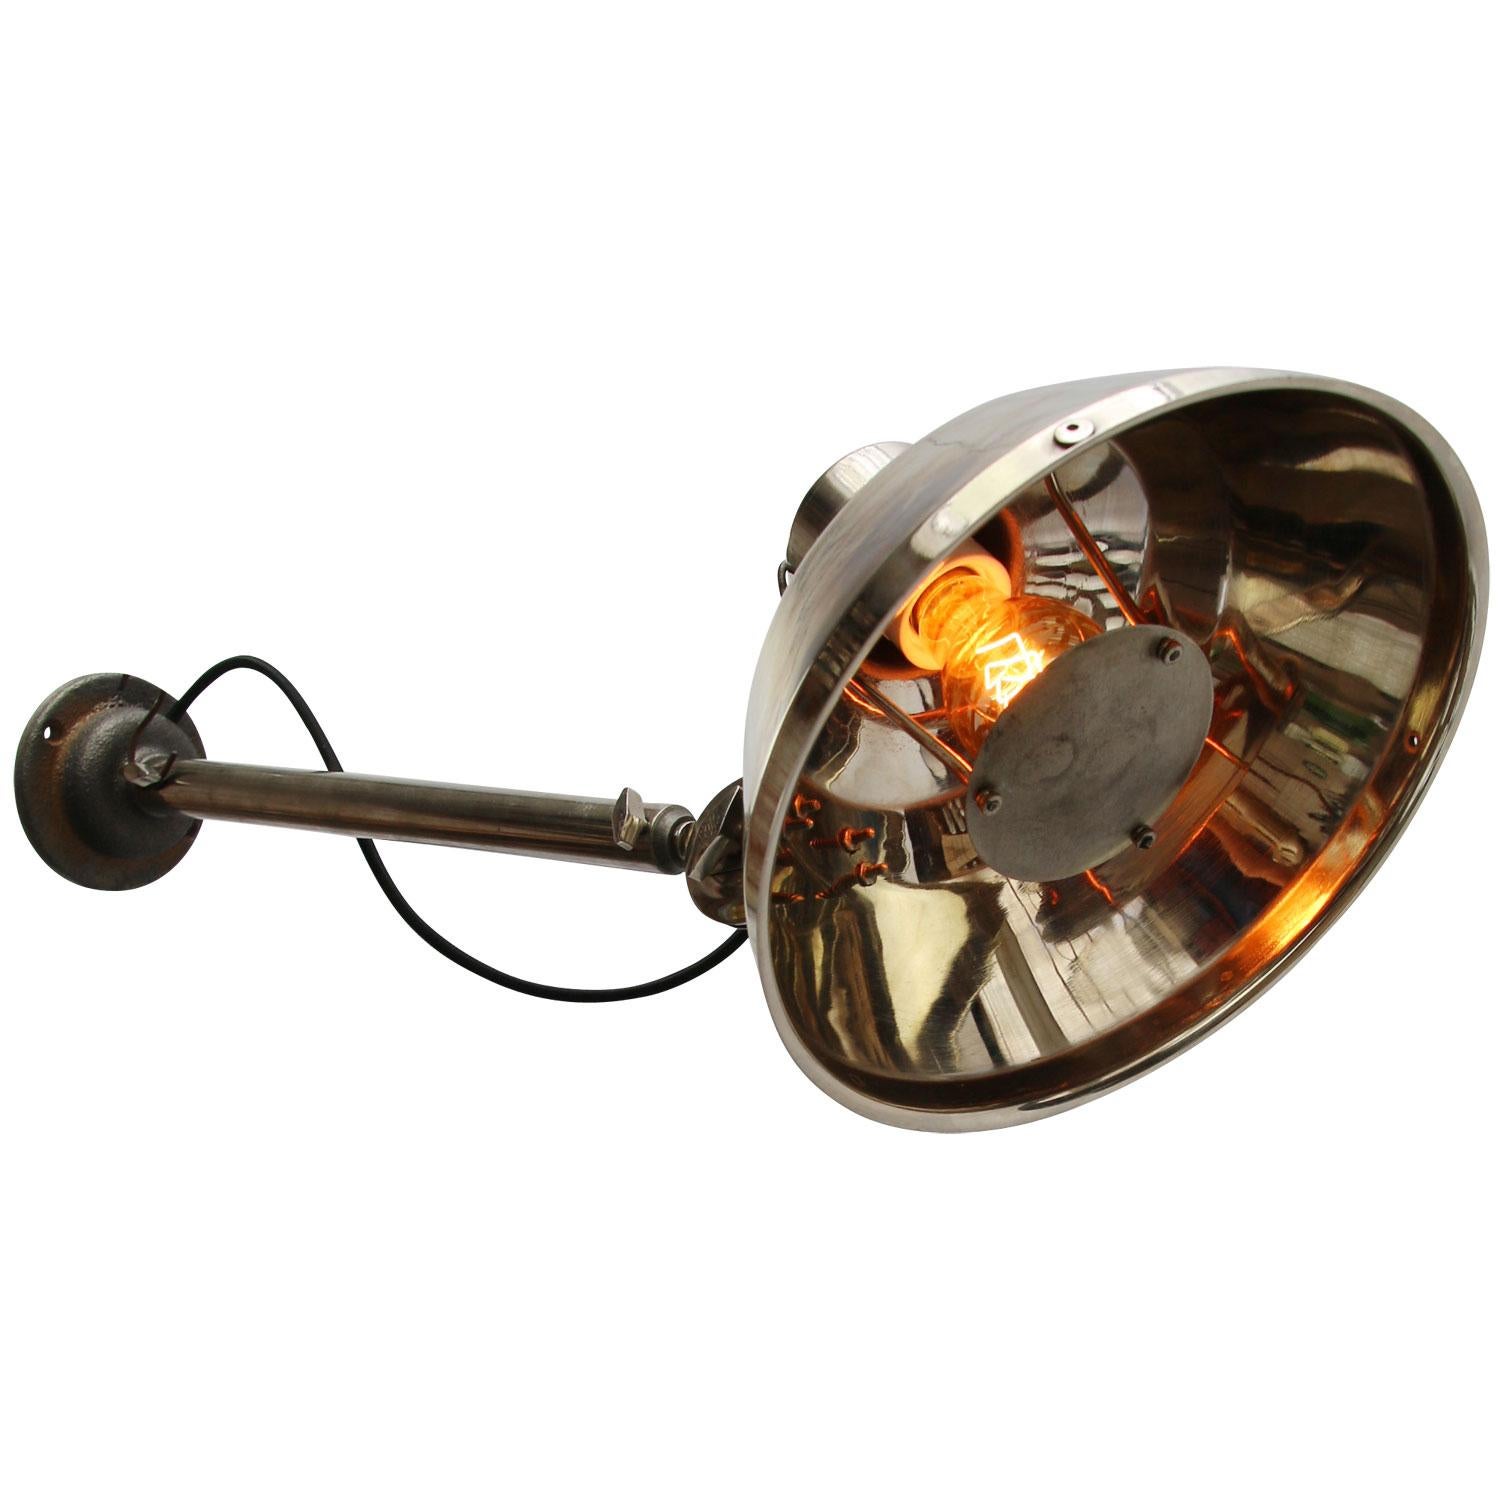 old medical wall light
shiny metal with cast iron wall mount.

Diameter wall piece 10.5 cm / 4”

Weight: 2.80 kg / 6.2 lb

Priced per individual item. All lamps have been made suitable by international standards for incandescent light bulbs,